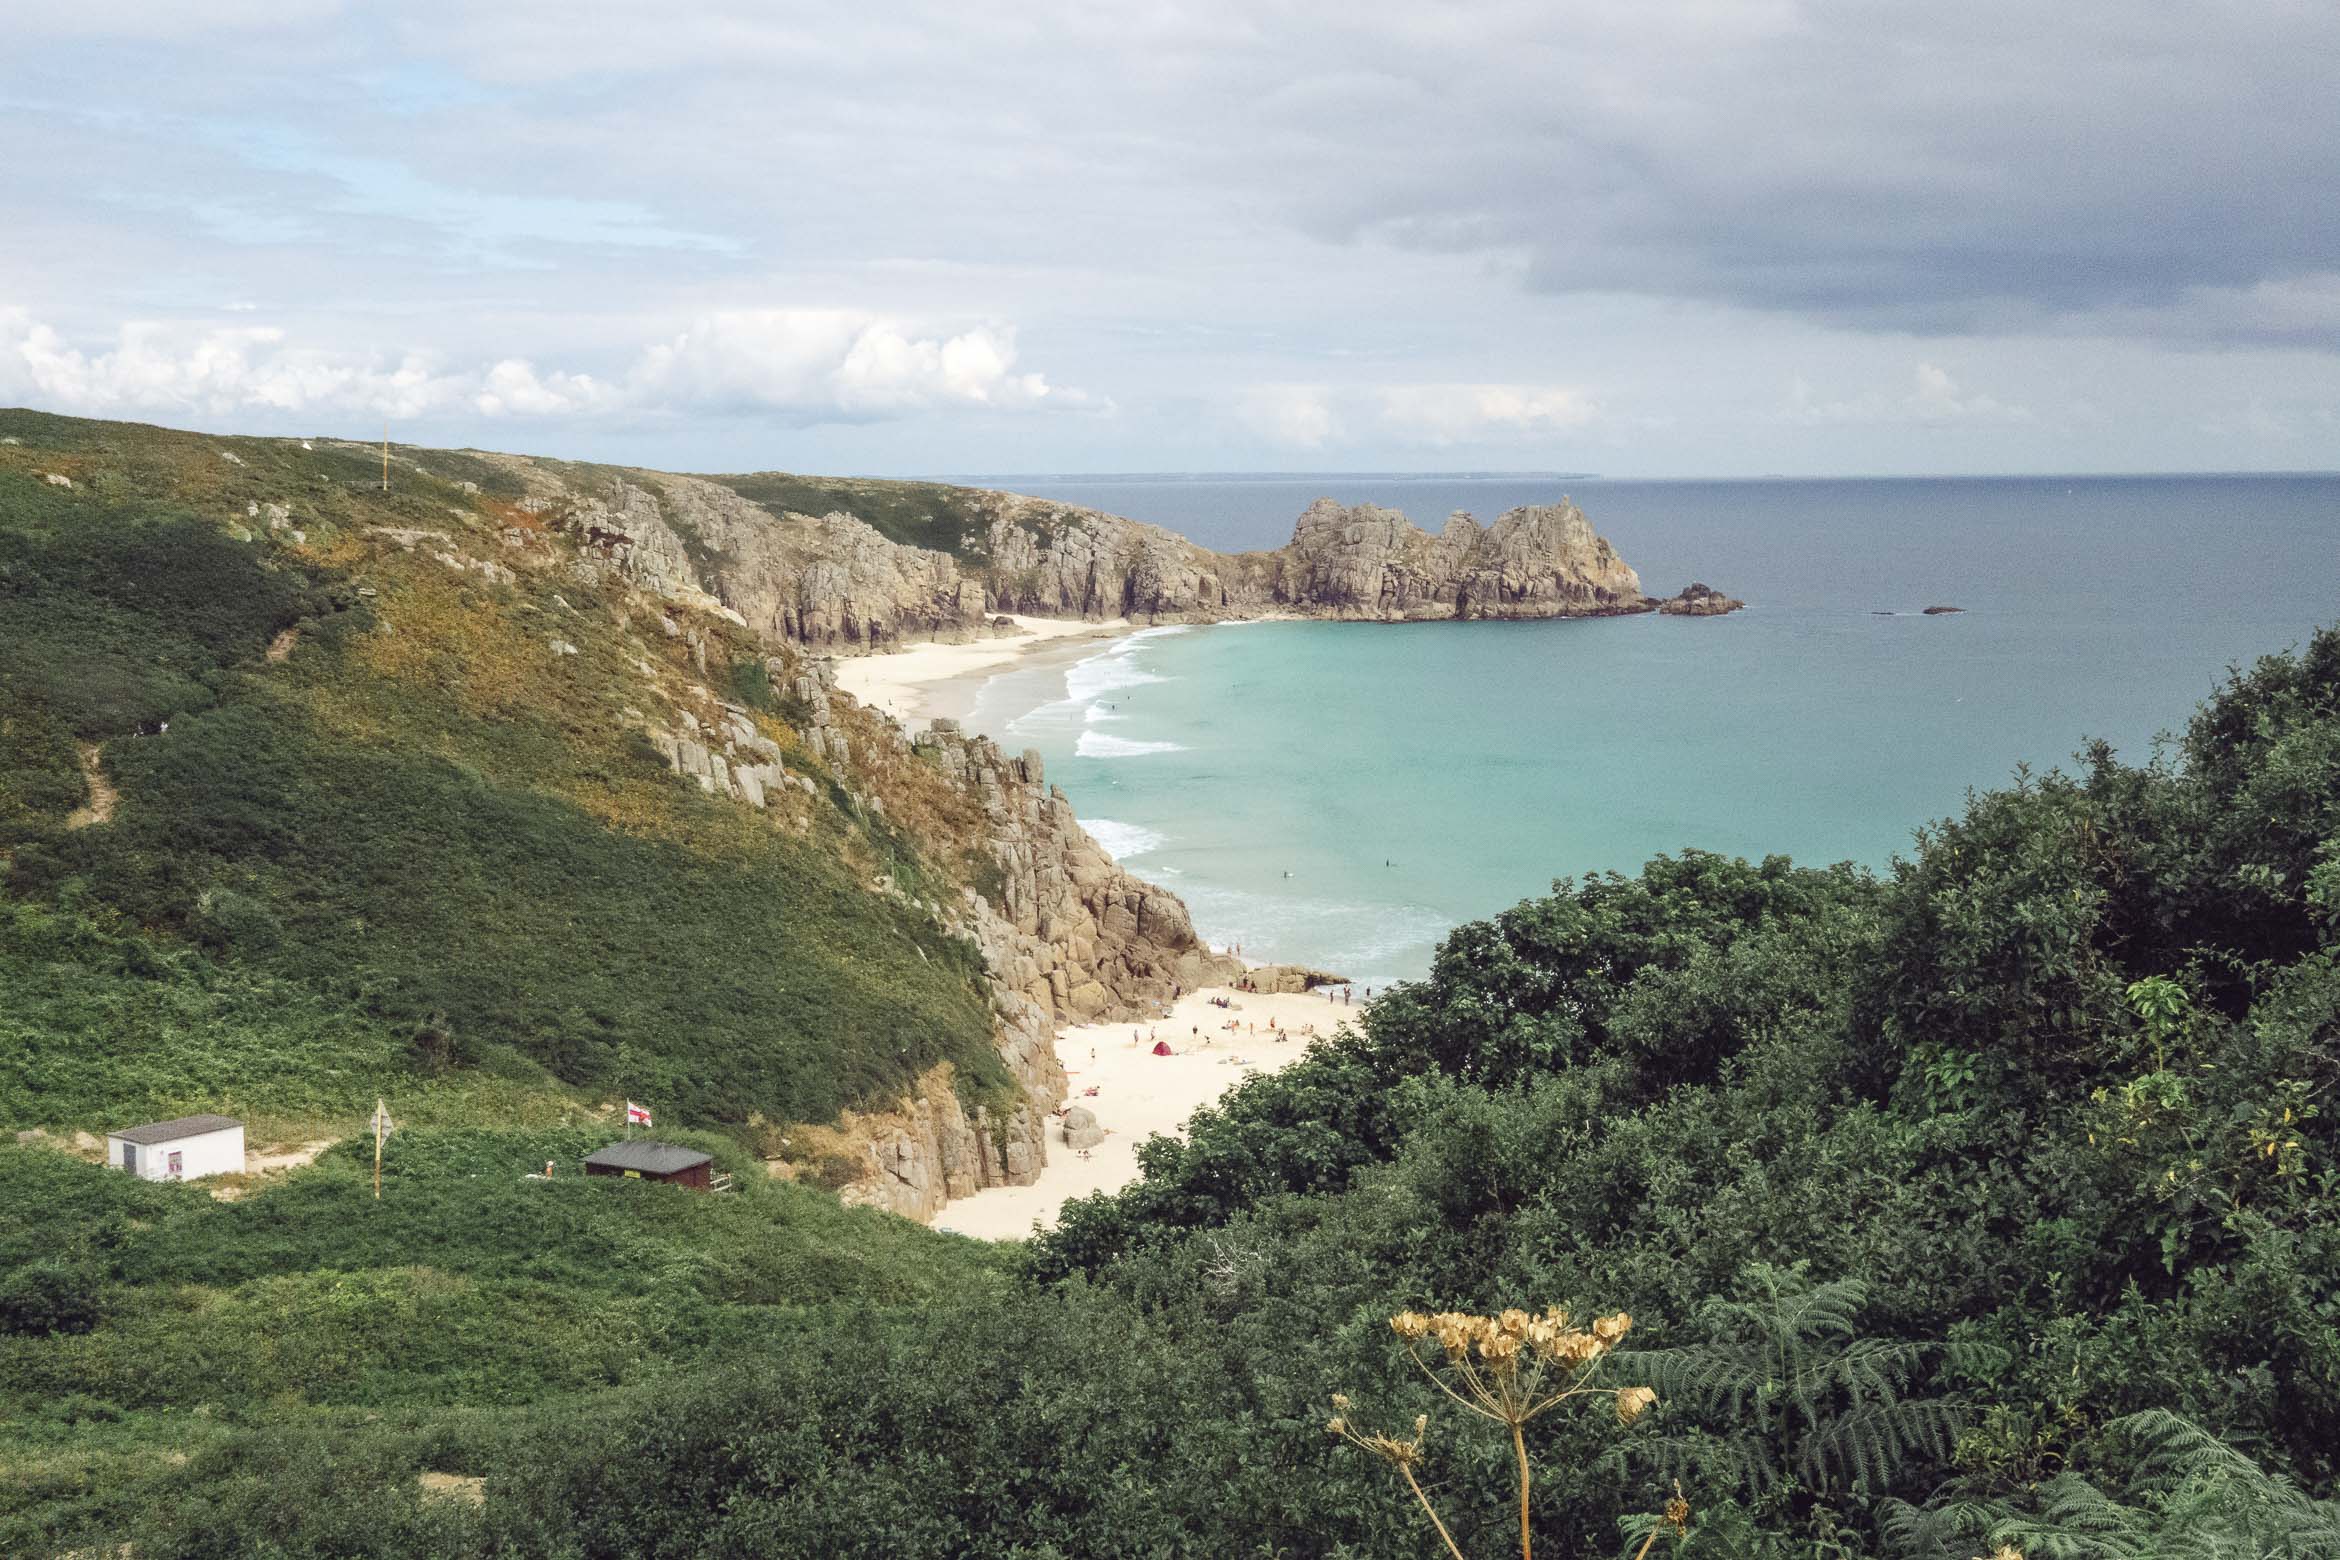 Porthcurno beach from above